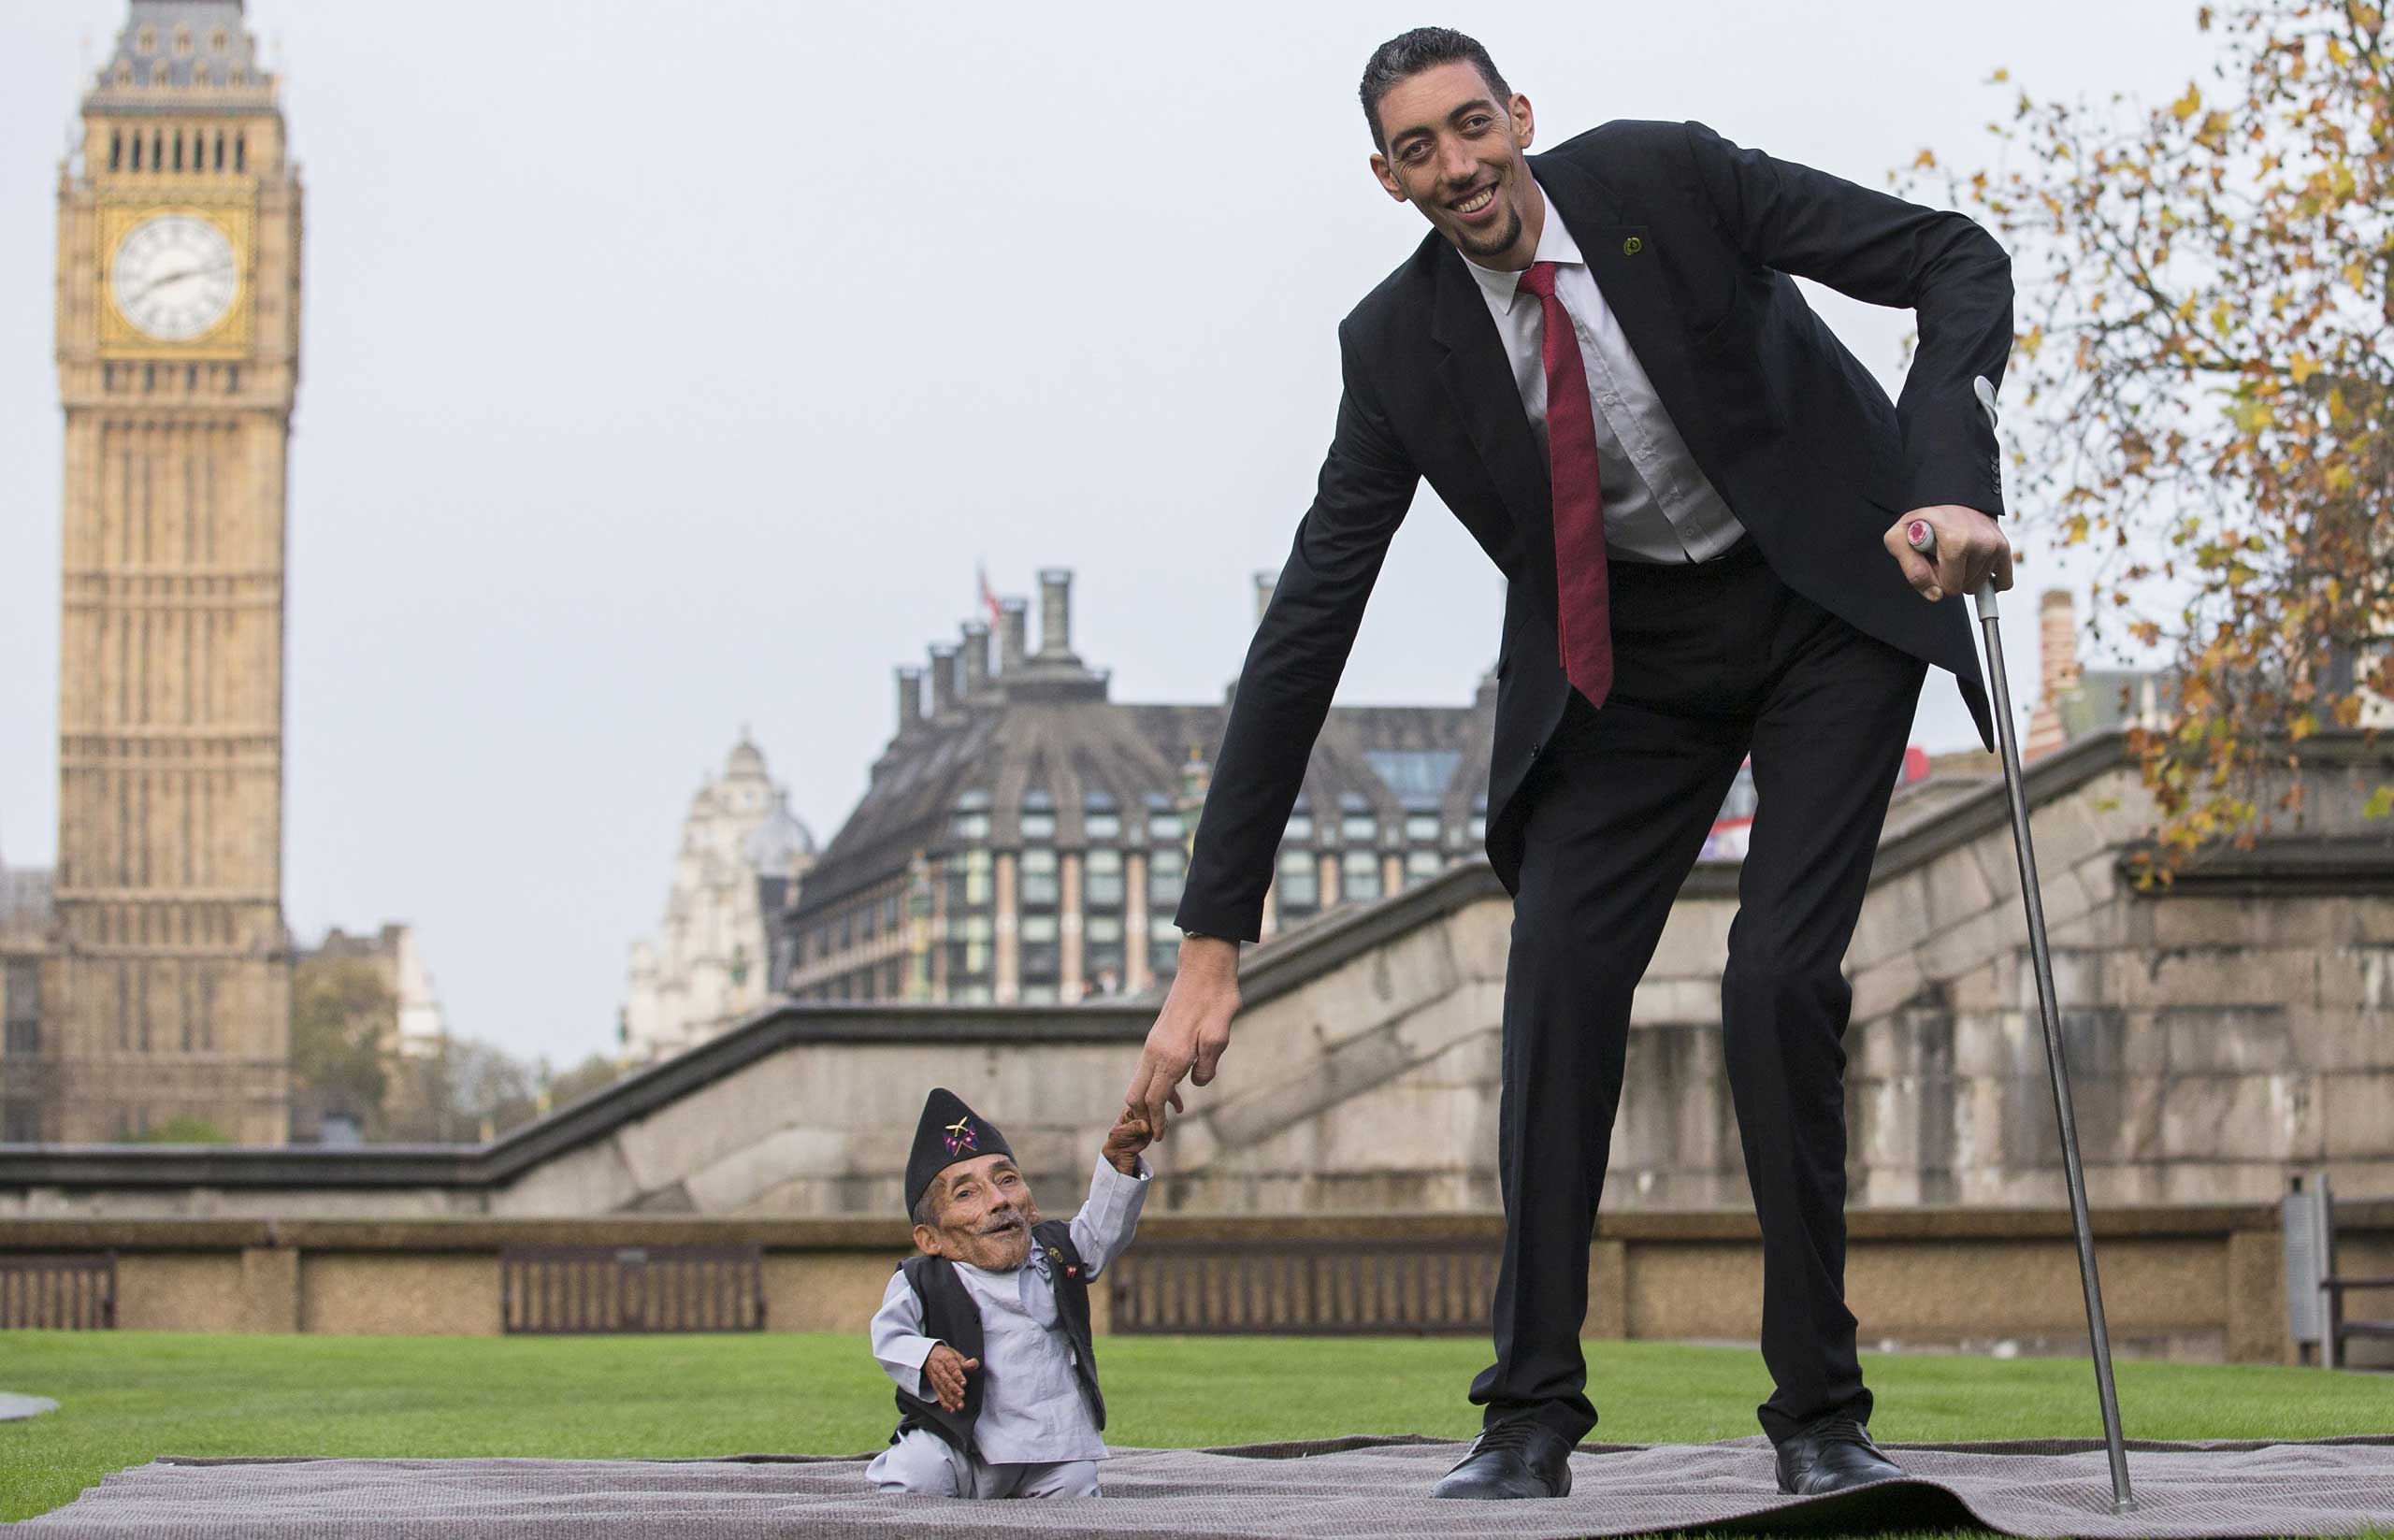 Chandra Bahadur Dangi, from Nepal, the shortest adult to have ever been verified by Guinness World Records, poses for pictures with the world's tallest man Sultan Kosen from Turkey, during a photocall in London on Nov. 13, 2014, to mark Guinness World Records Day. (Andrew Cowie—AFP/Getty Images)